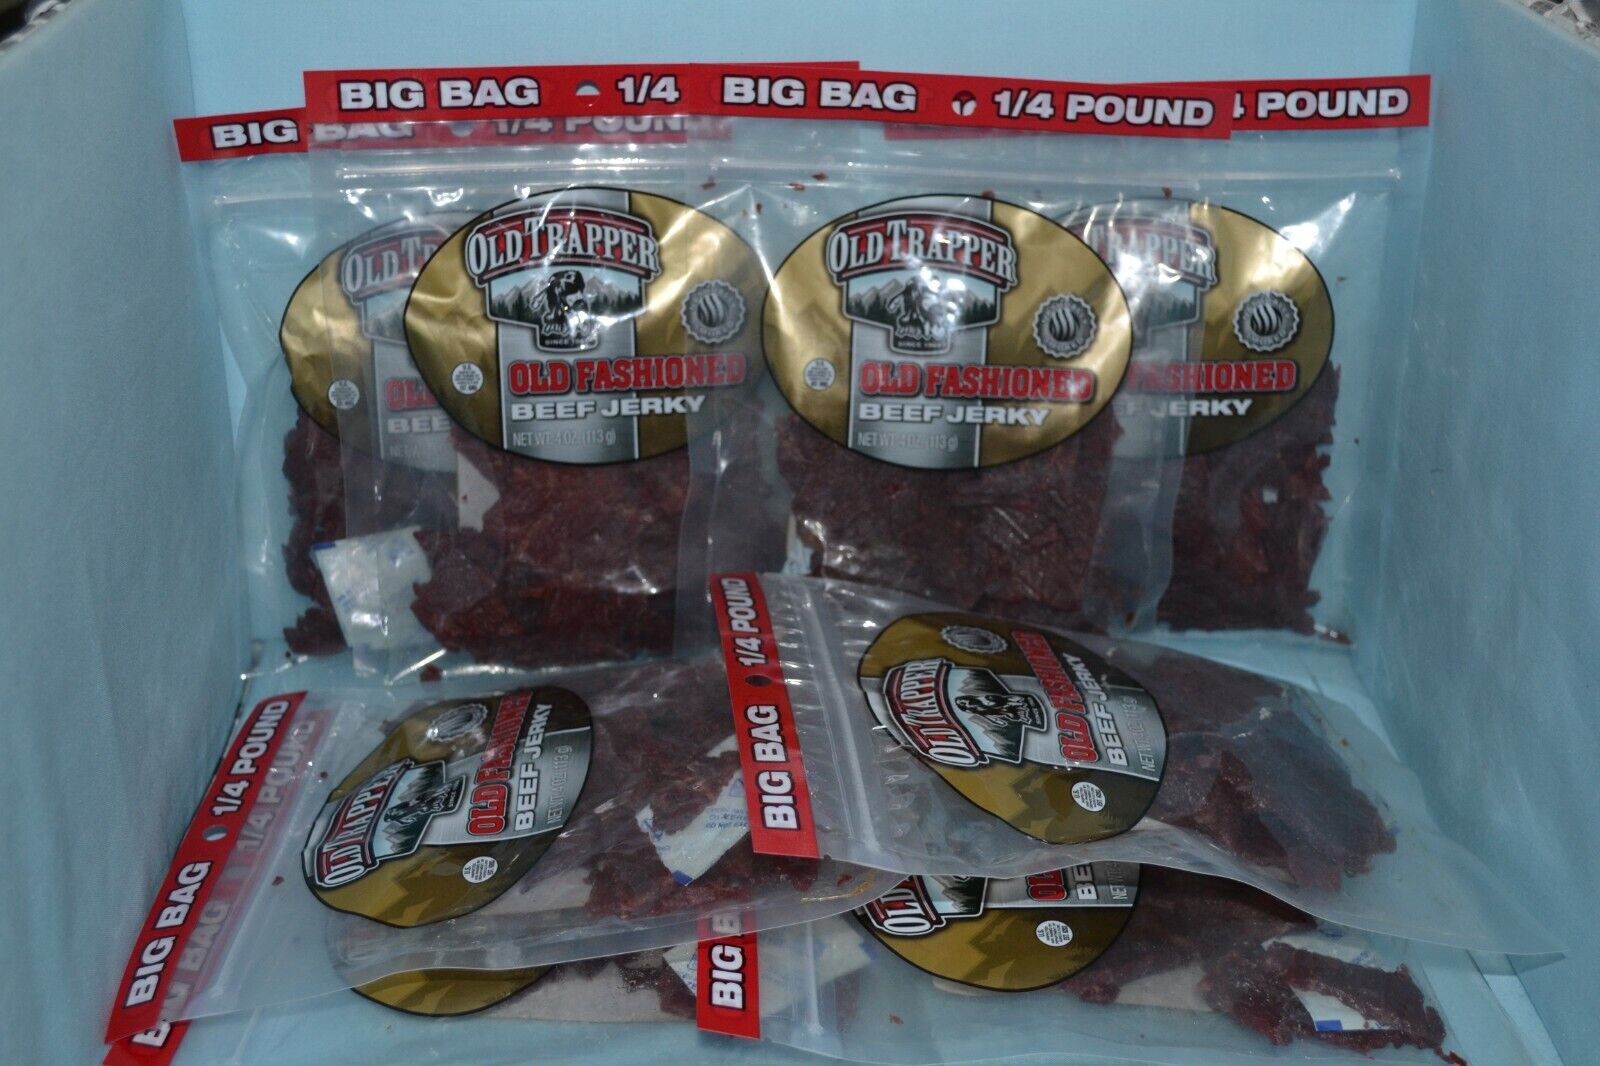 Lot Of 8 Old Trapper Old Fashioned Original Beef Jerky, 4 oz Each, Exp. 11/2025 Old Trapper Does Not Apply